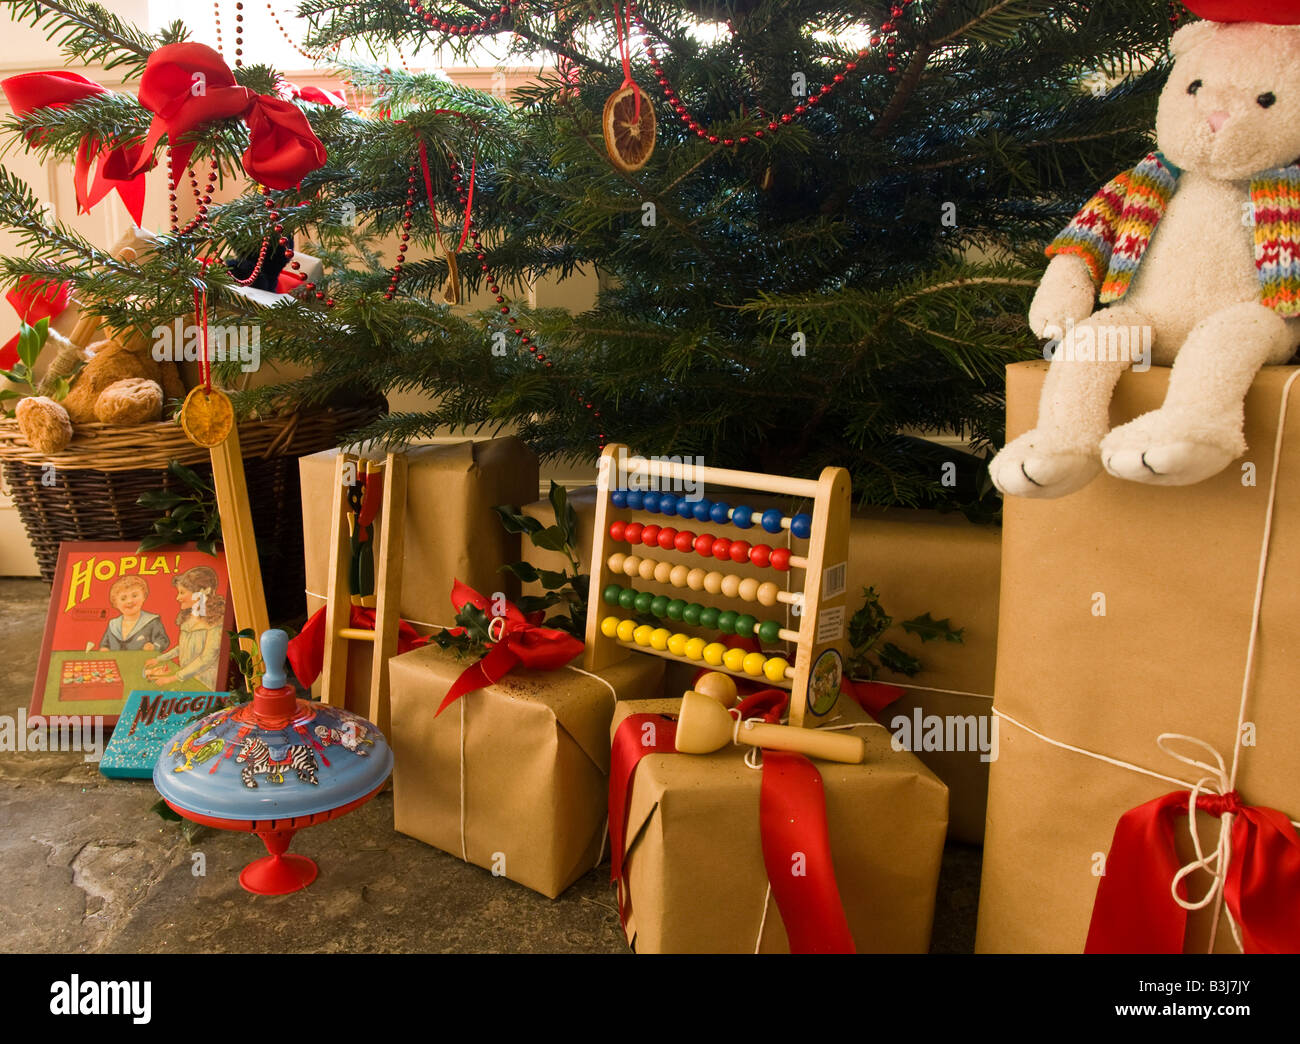 A selection of children s old fashioned Christmas presents underneath a Christmas Tree decorated in a